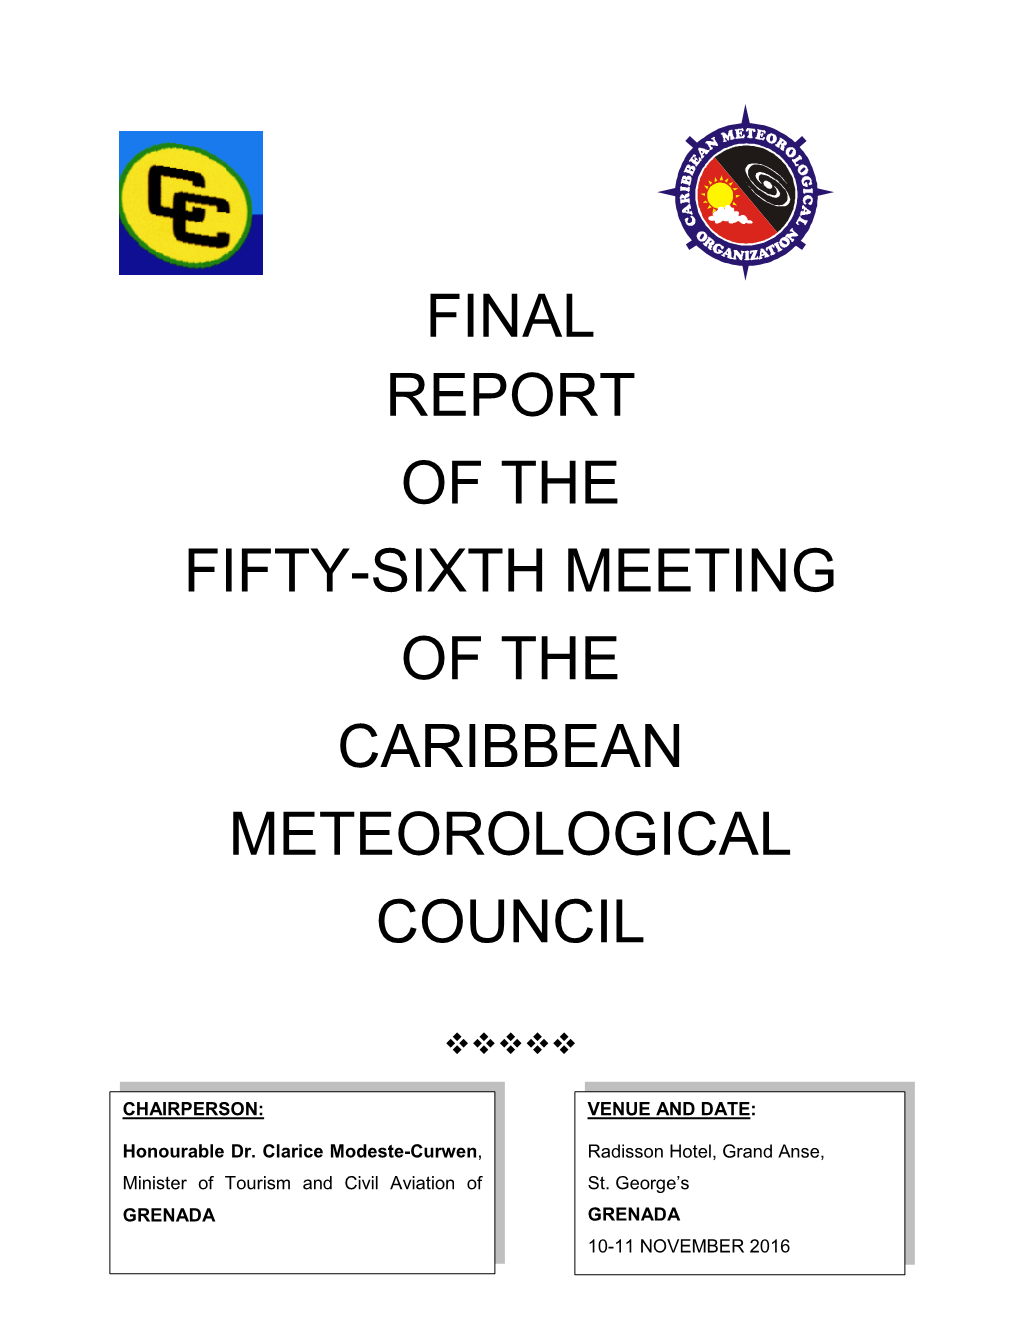 Final Report of the Fifty-Sixth Meeting of the Caribbean Meteorological Council